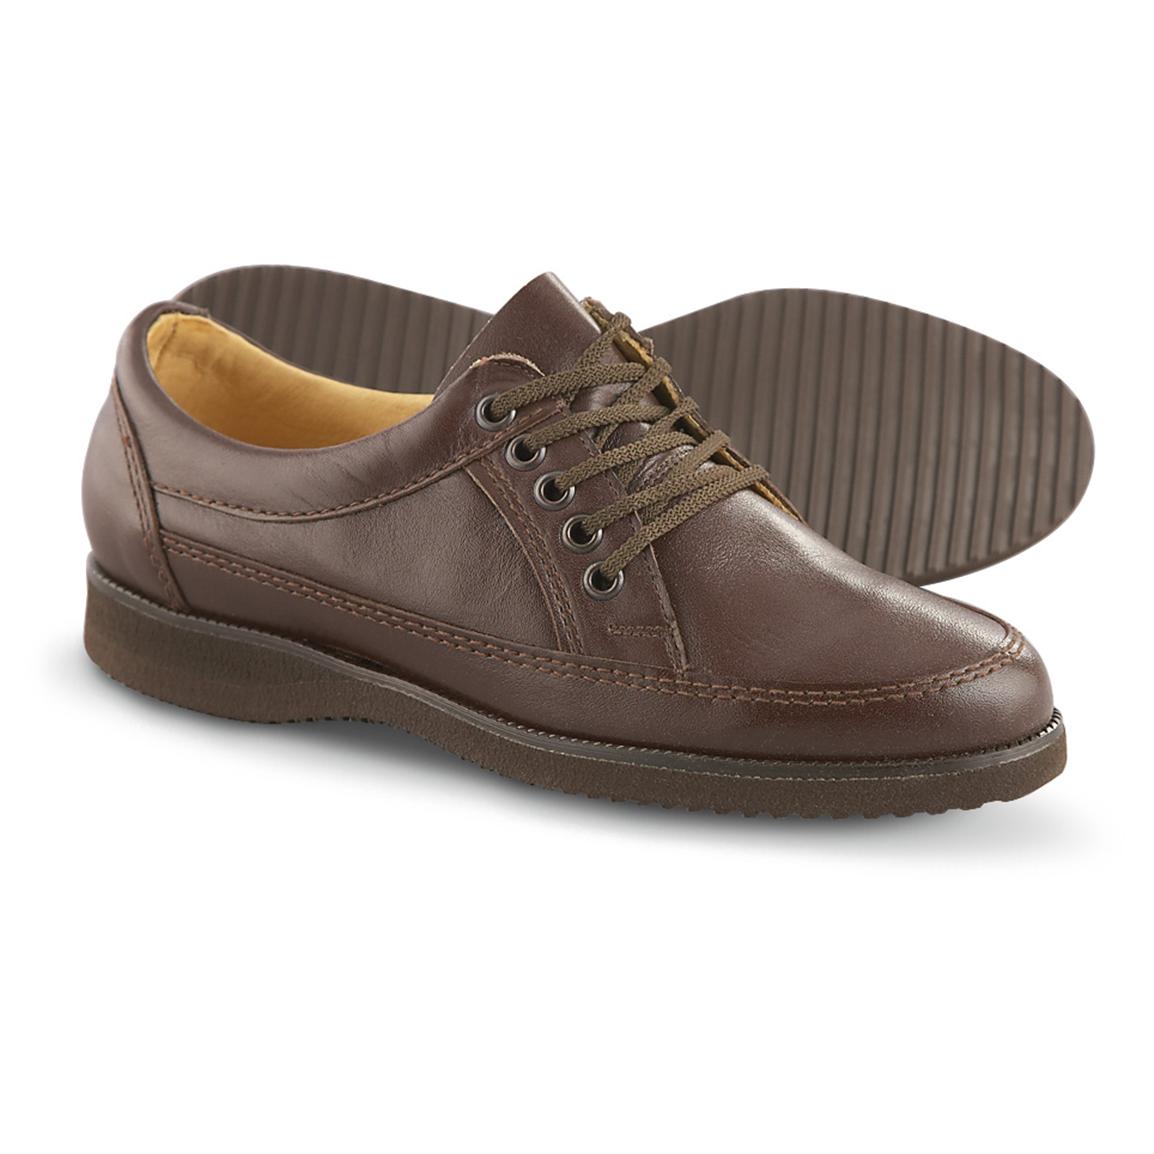 Men's New Czech Leather Work Shoes, Brown - 140455, Combat & Tactical ...